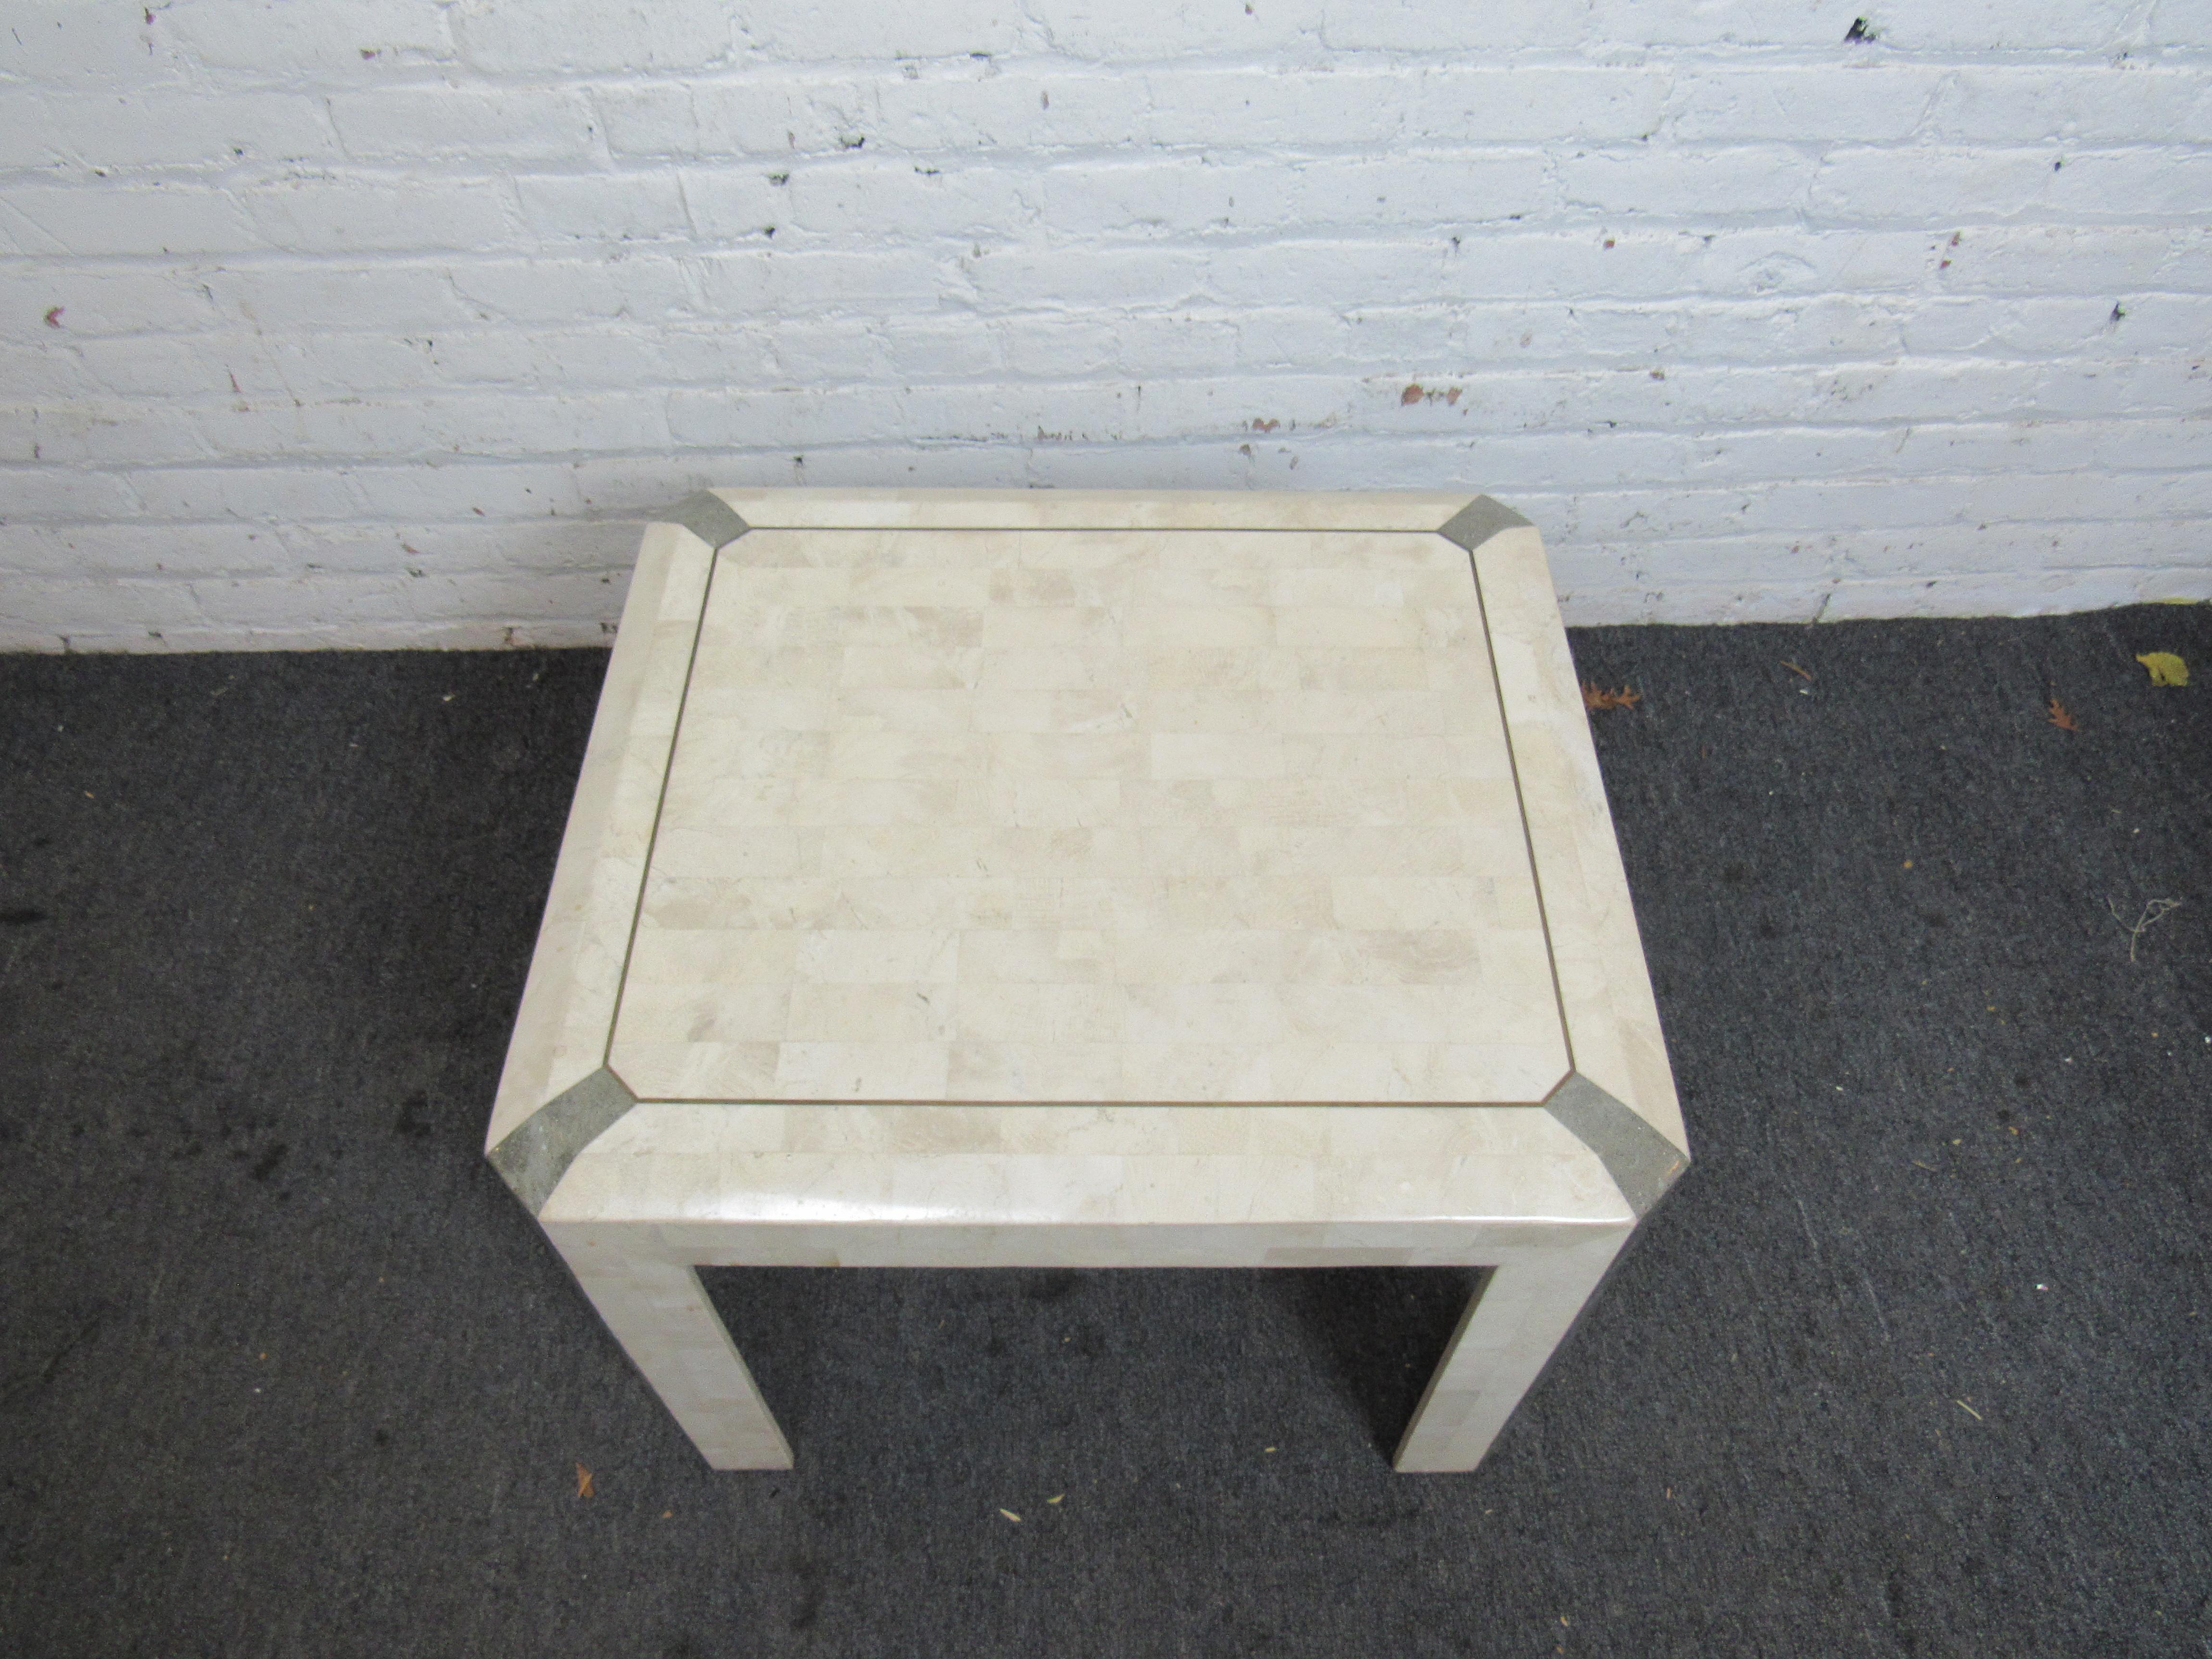 Unusual tessellated stone side table. Beautiful finish throughout with nice gray stone inlays.